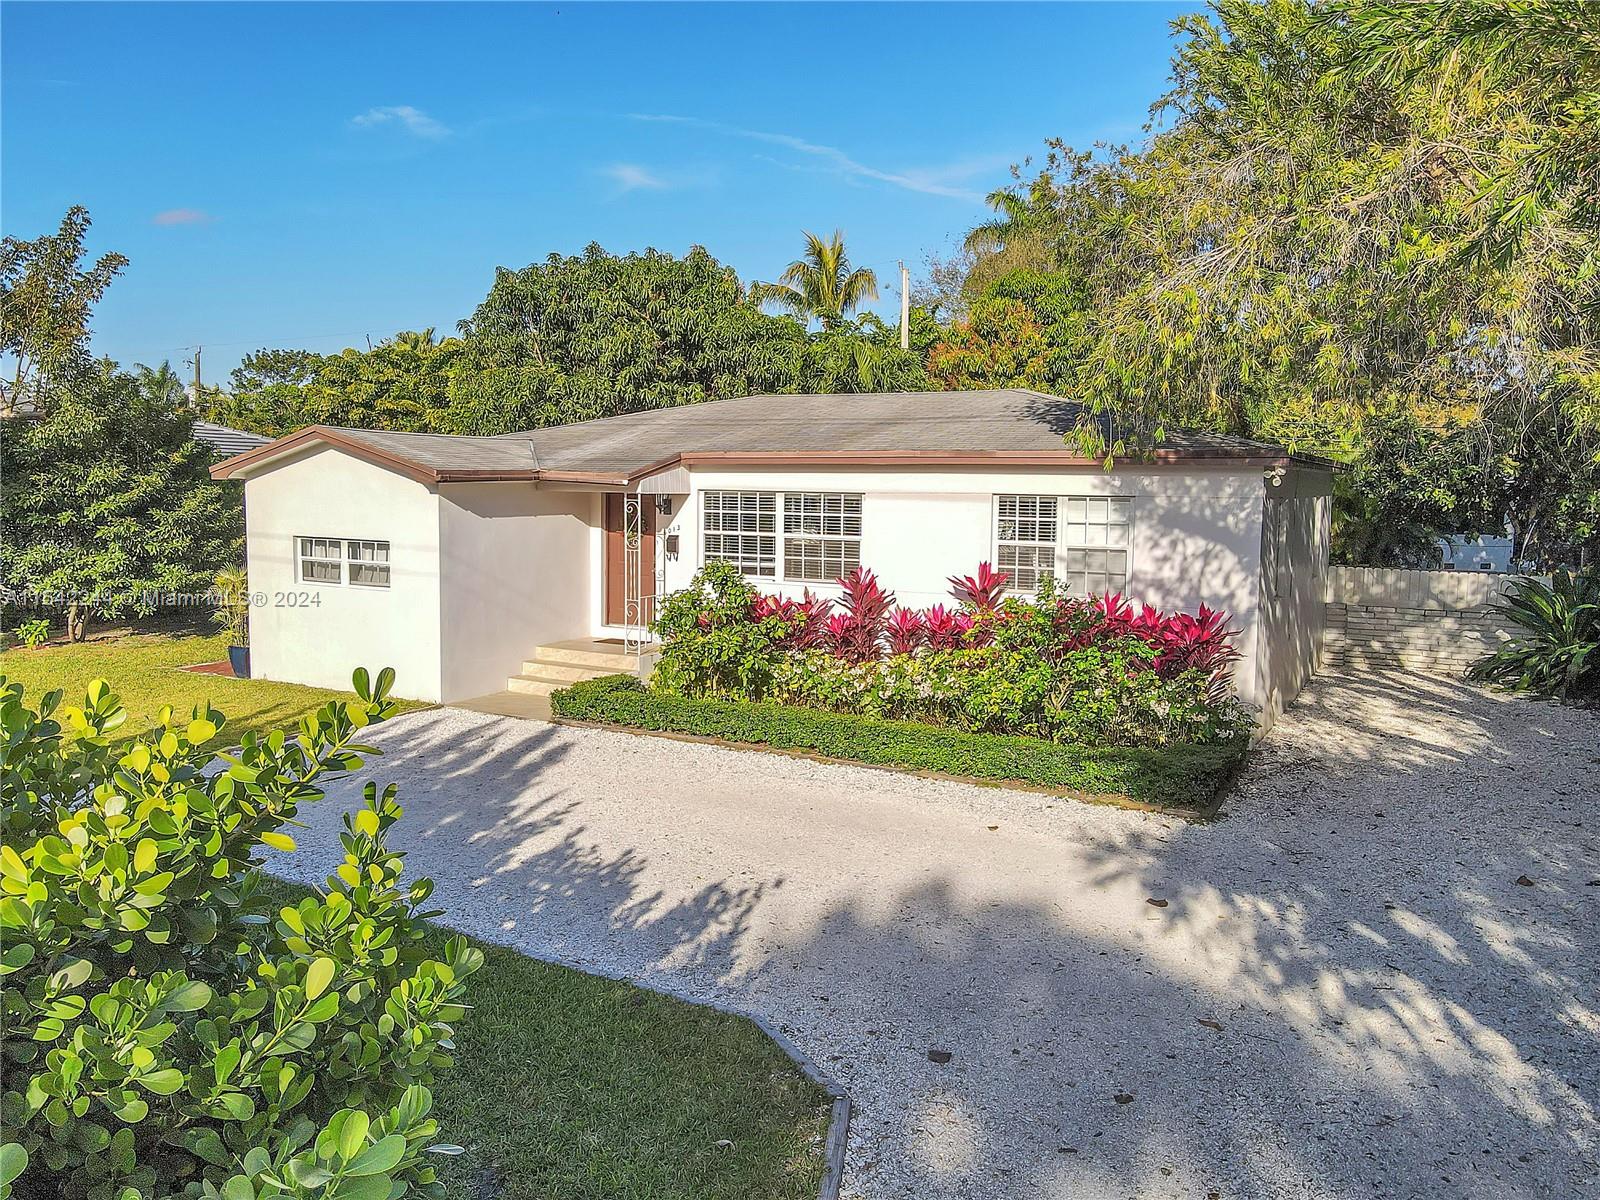 Charming, well-maintained 3/2 home in this highly desirable South Miami neighborhood. Bathrooms recently renovated. New A/C. Nicely landscaped, oversized 10,260 sqft lot with fruit trees. Plenty of room for a pool and/or addition. Great Location just south of Coral Gables, near the University of Miami campus.